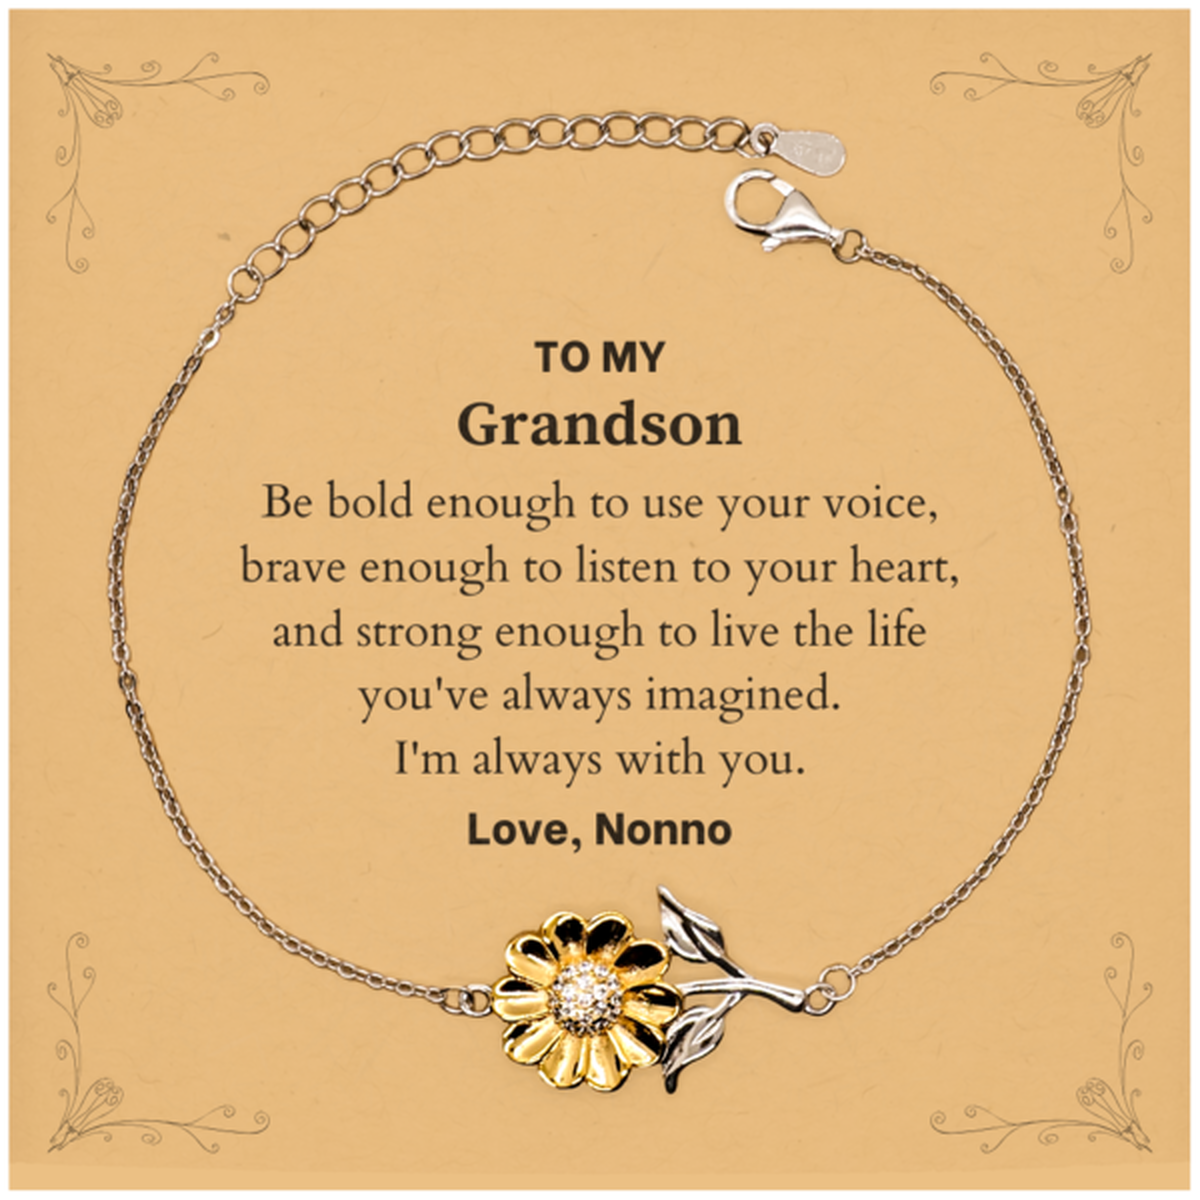 Keepsake Grandson Sunflower Bracelet Gift Idea Graduation Christmas Birthday Grandson from Nonno, Grandson Be bold enough to use your voice, brave enough to listen to your heart. Love, Nonno